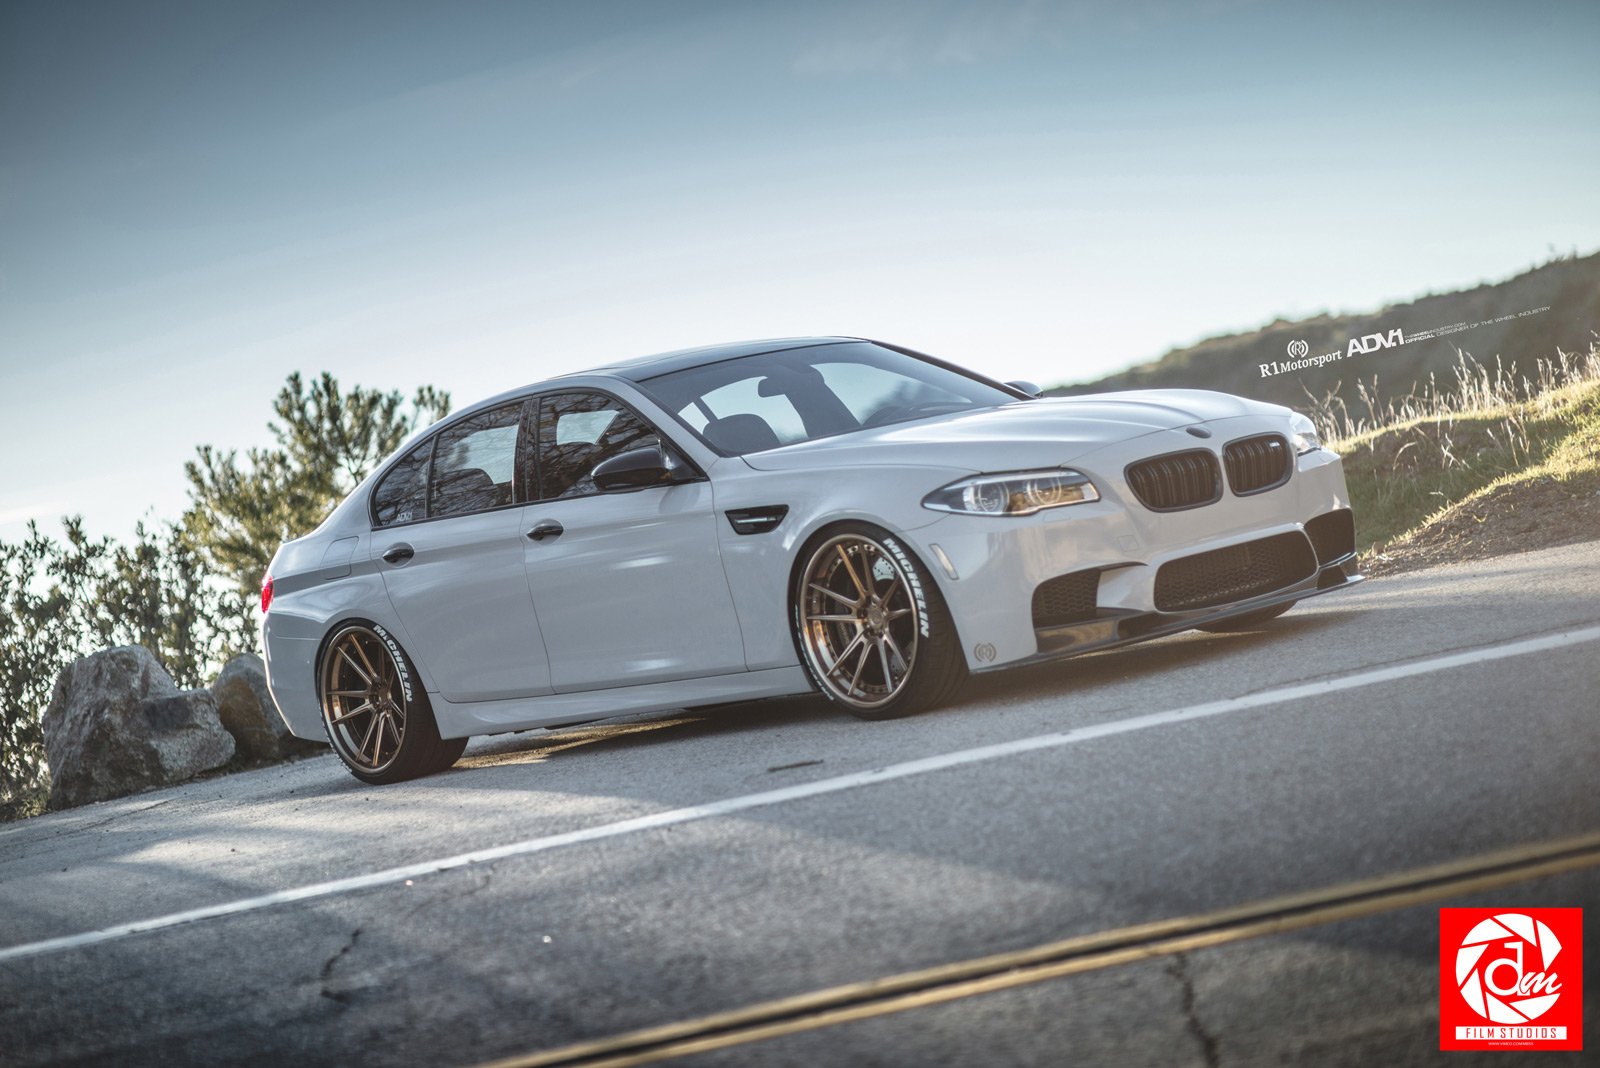 Adv1 Wheels Bmw M5 F10 Cars Coupe Tuning Wallpaper